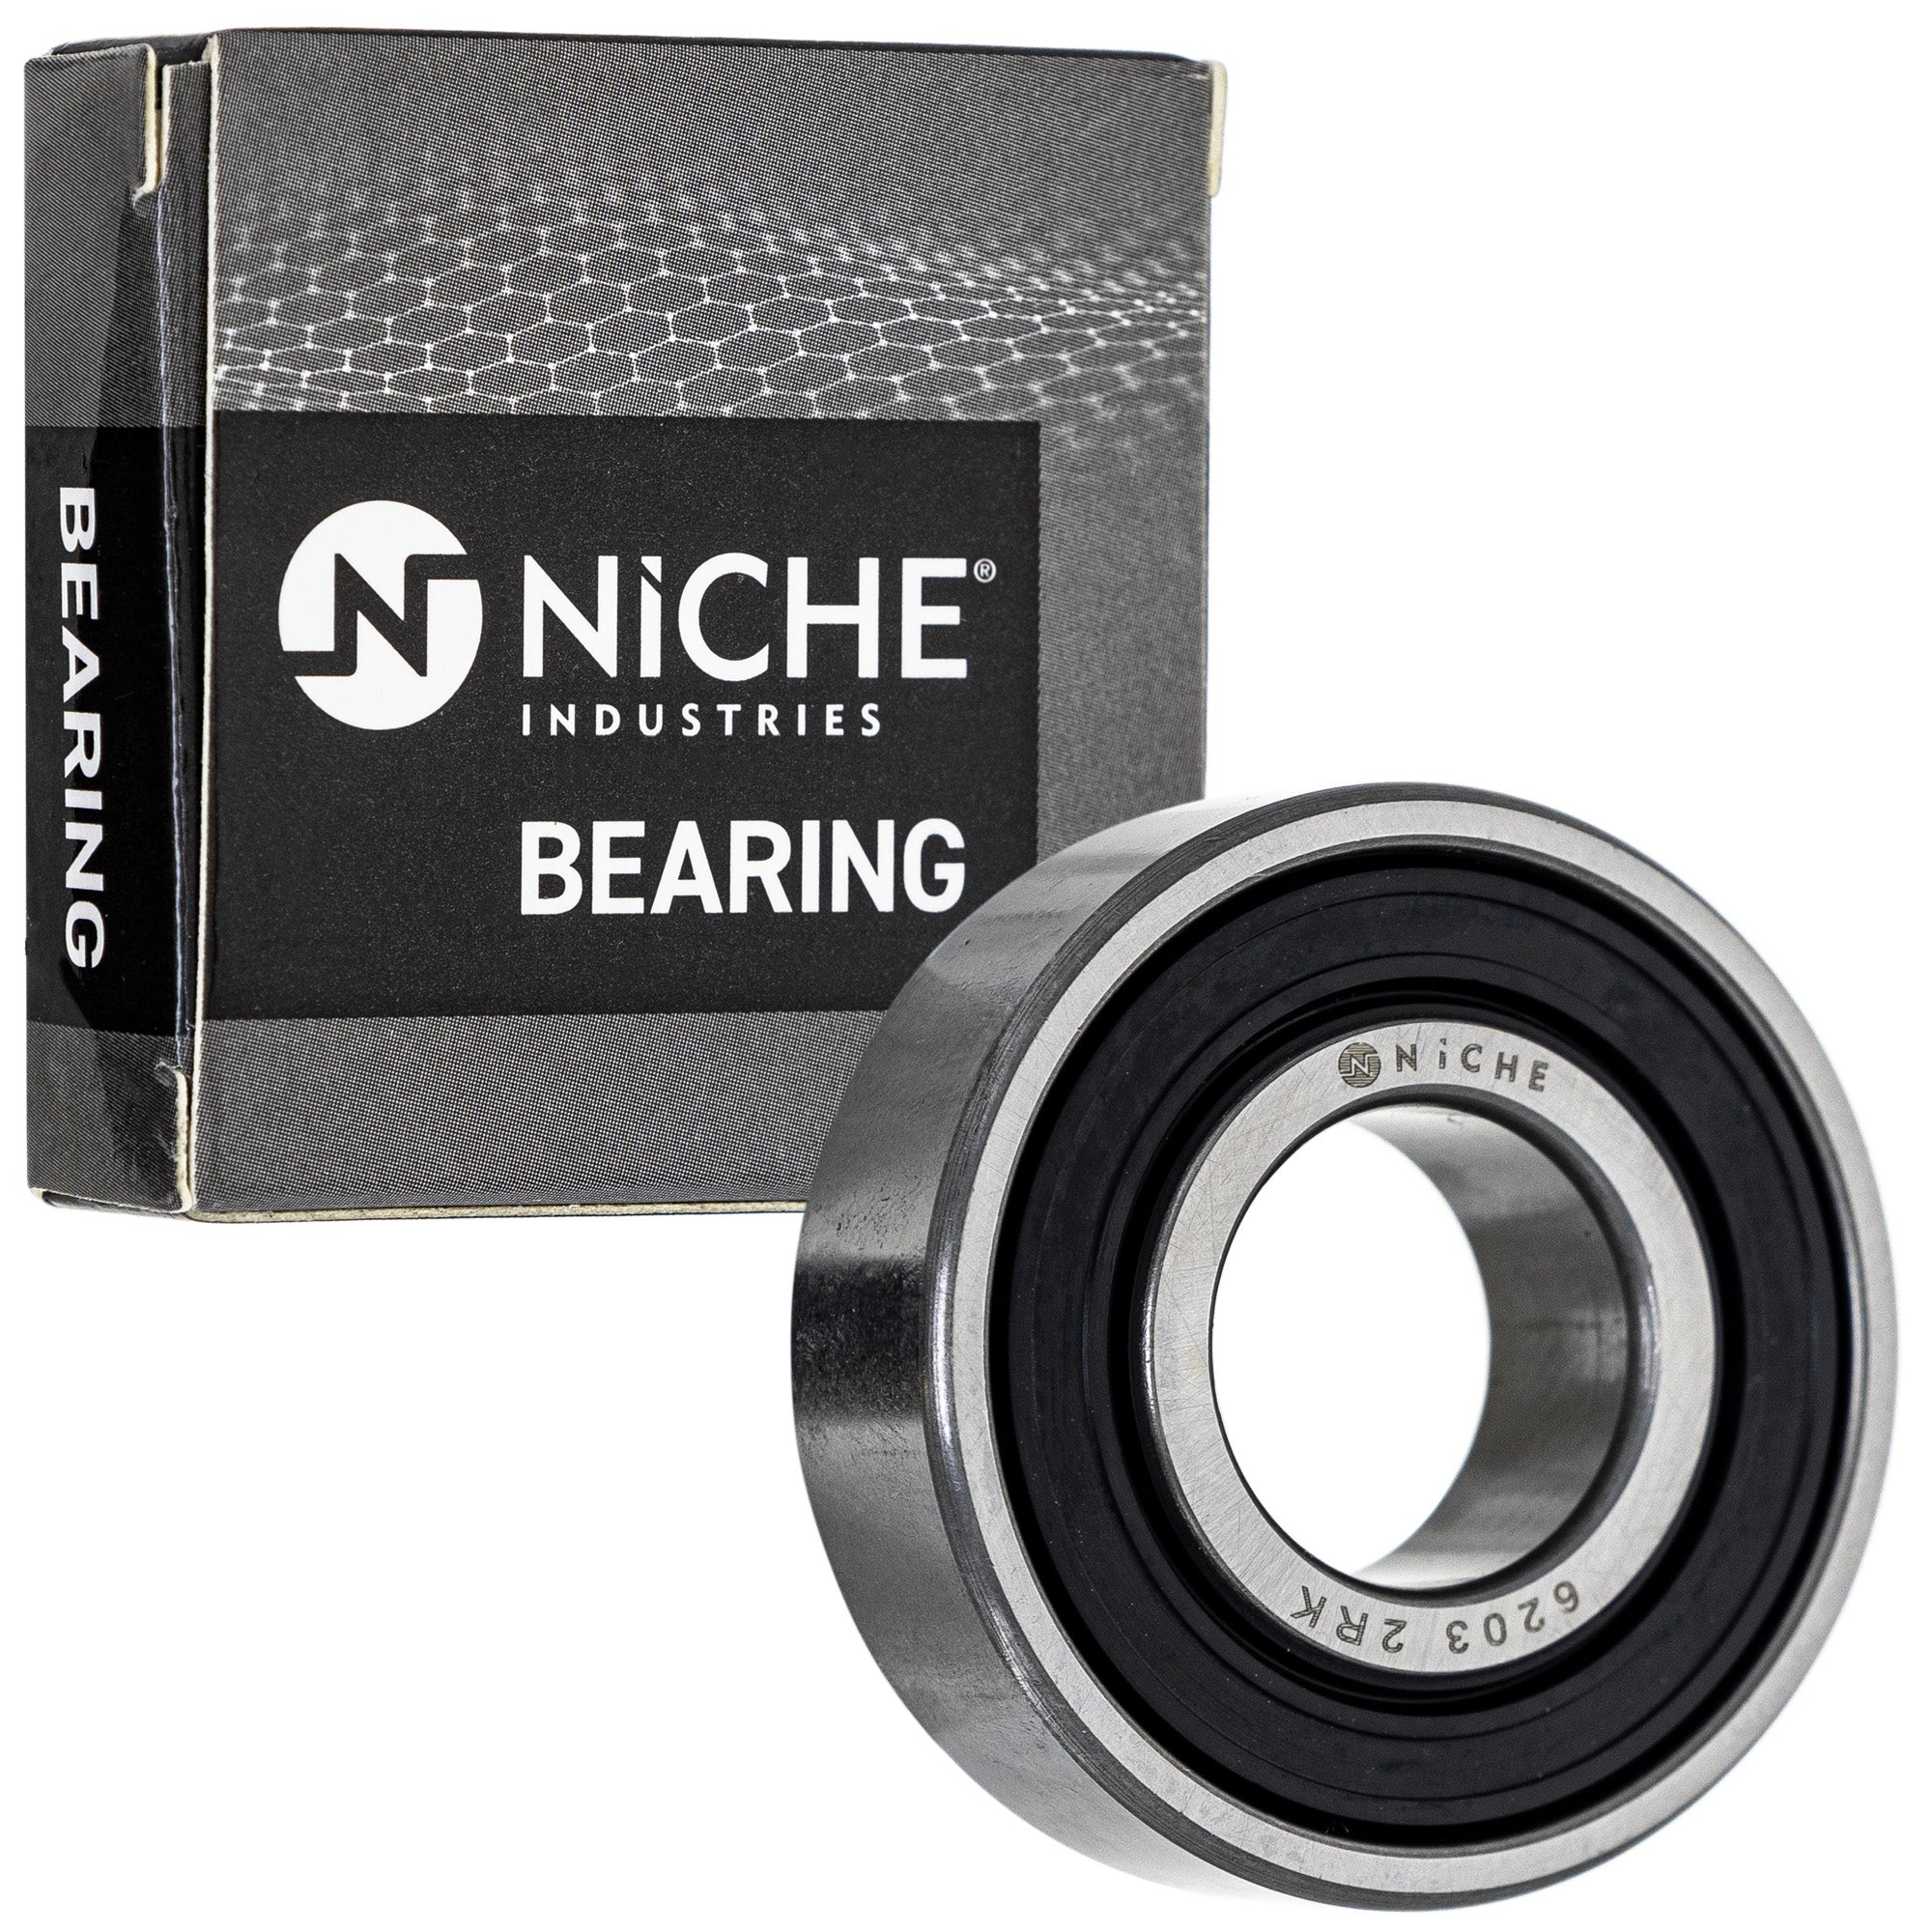 NICHE 519-CBB2280R Bearing & Seal Kit 2-Pack for zOTHER SRX600 IT200